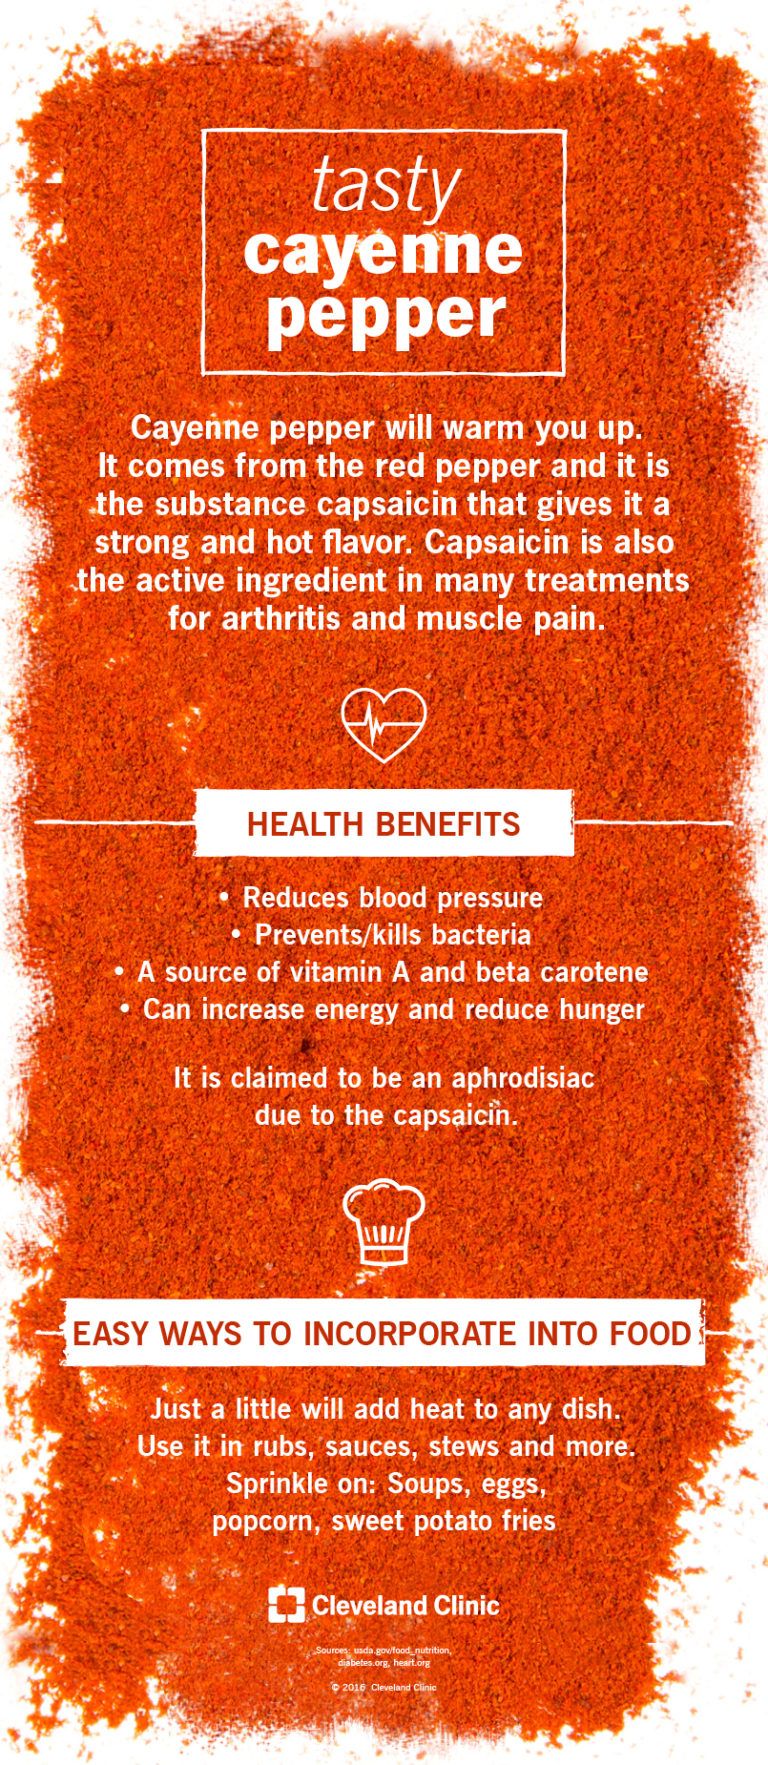 What Hot Spice Can Speed Your Metabolism? (Infographic)